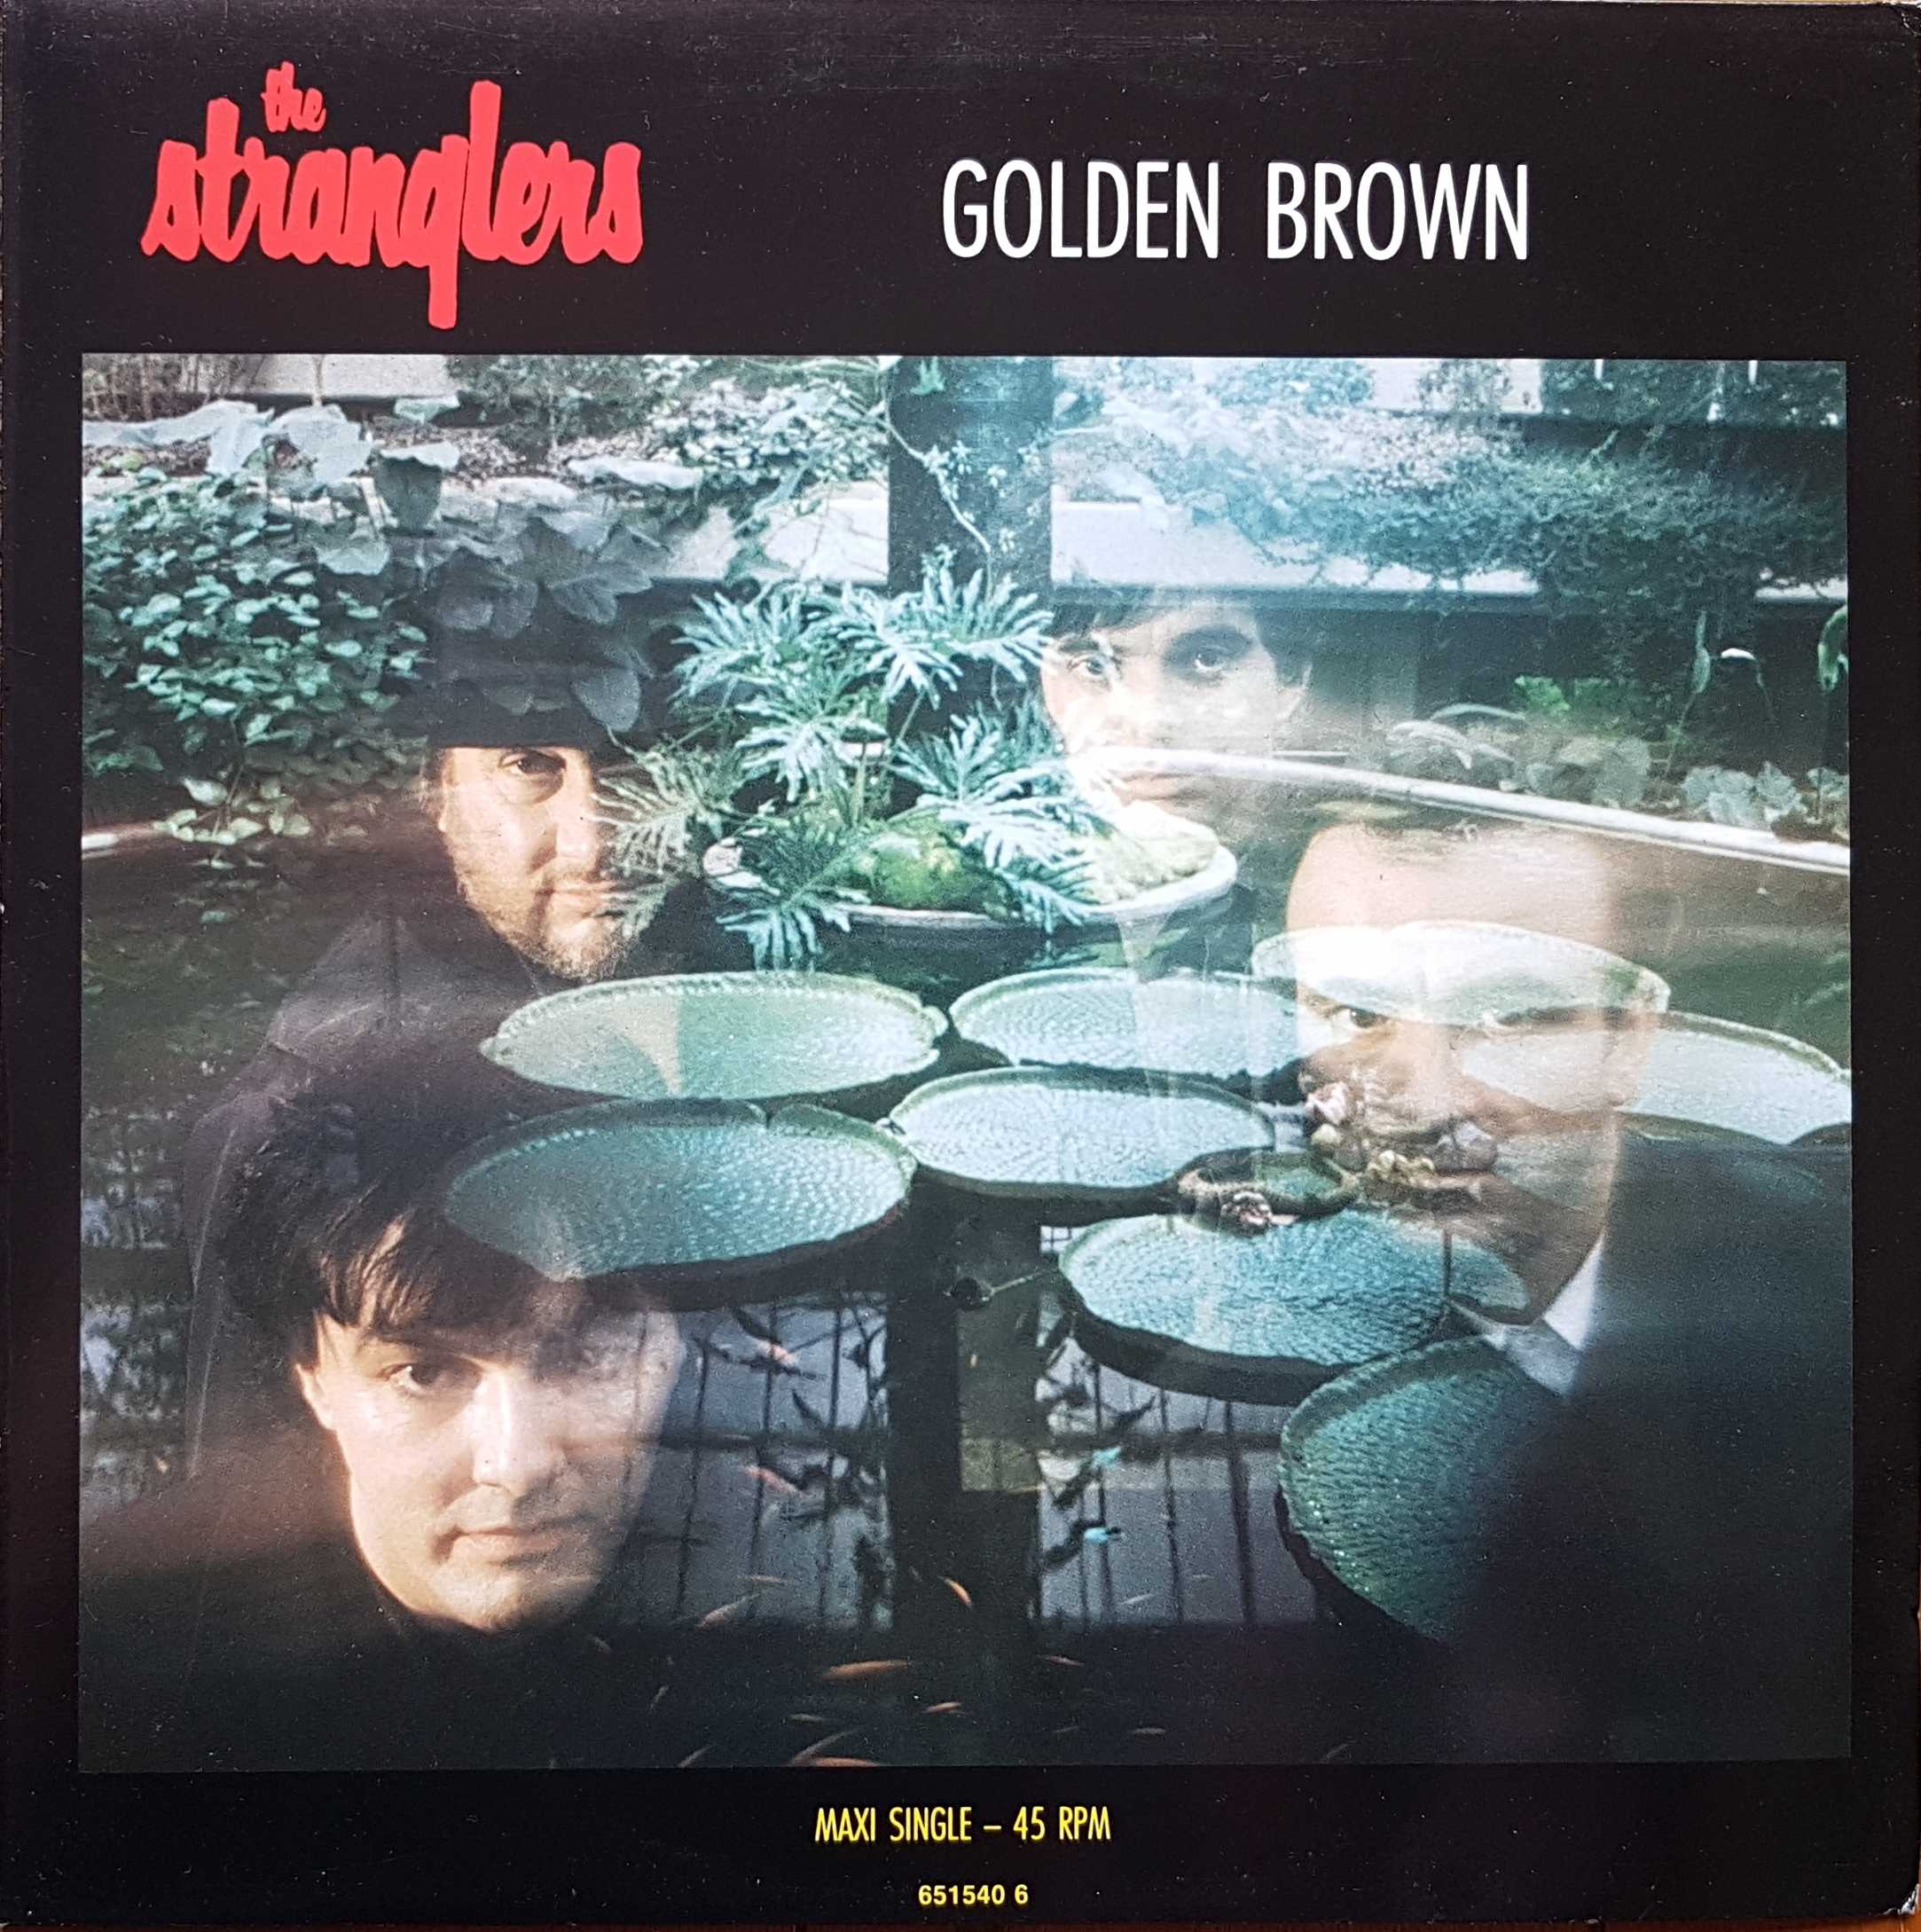 Picture of 651540 6 Golden brown by artist The Stranglers